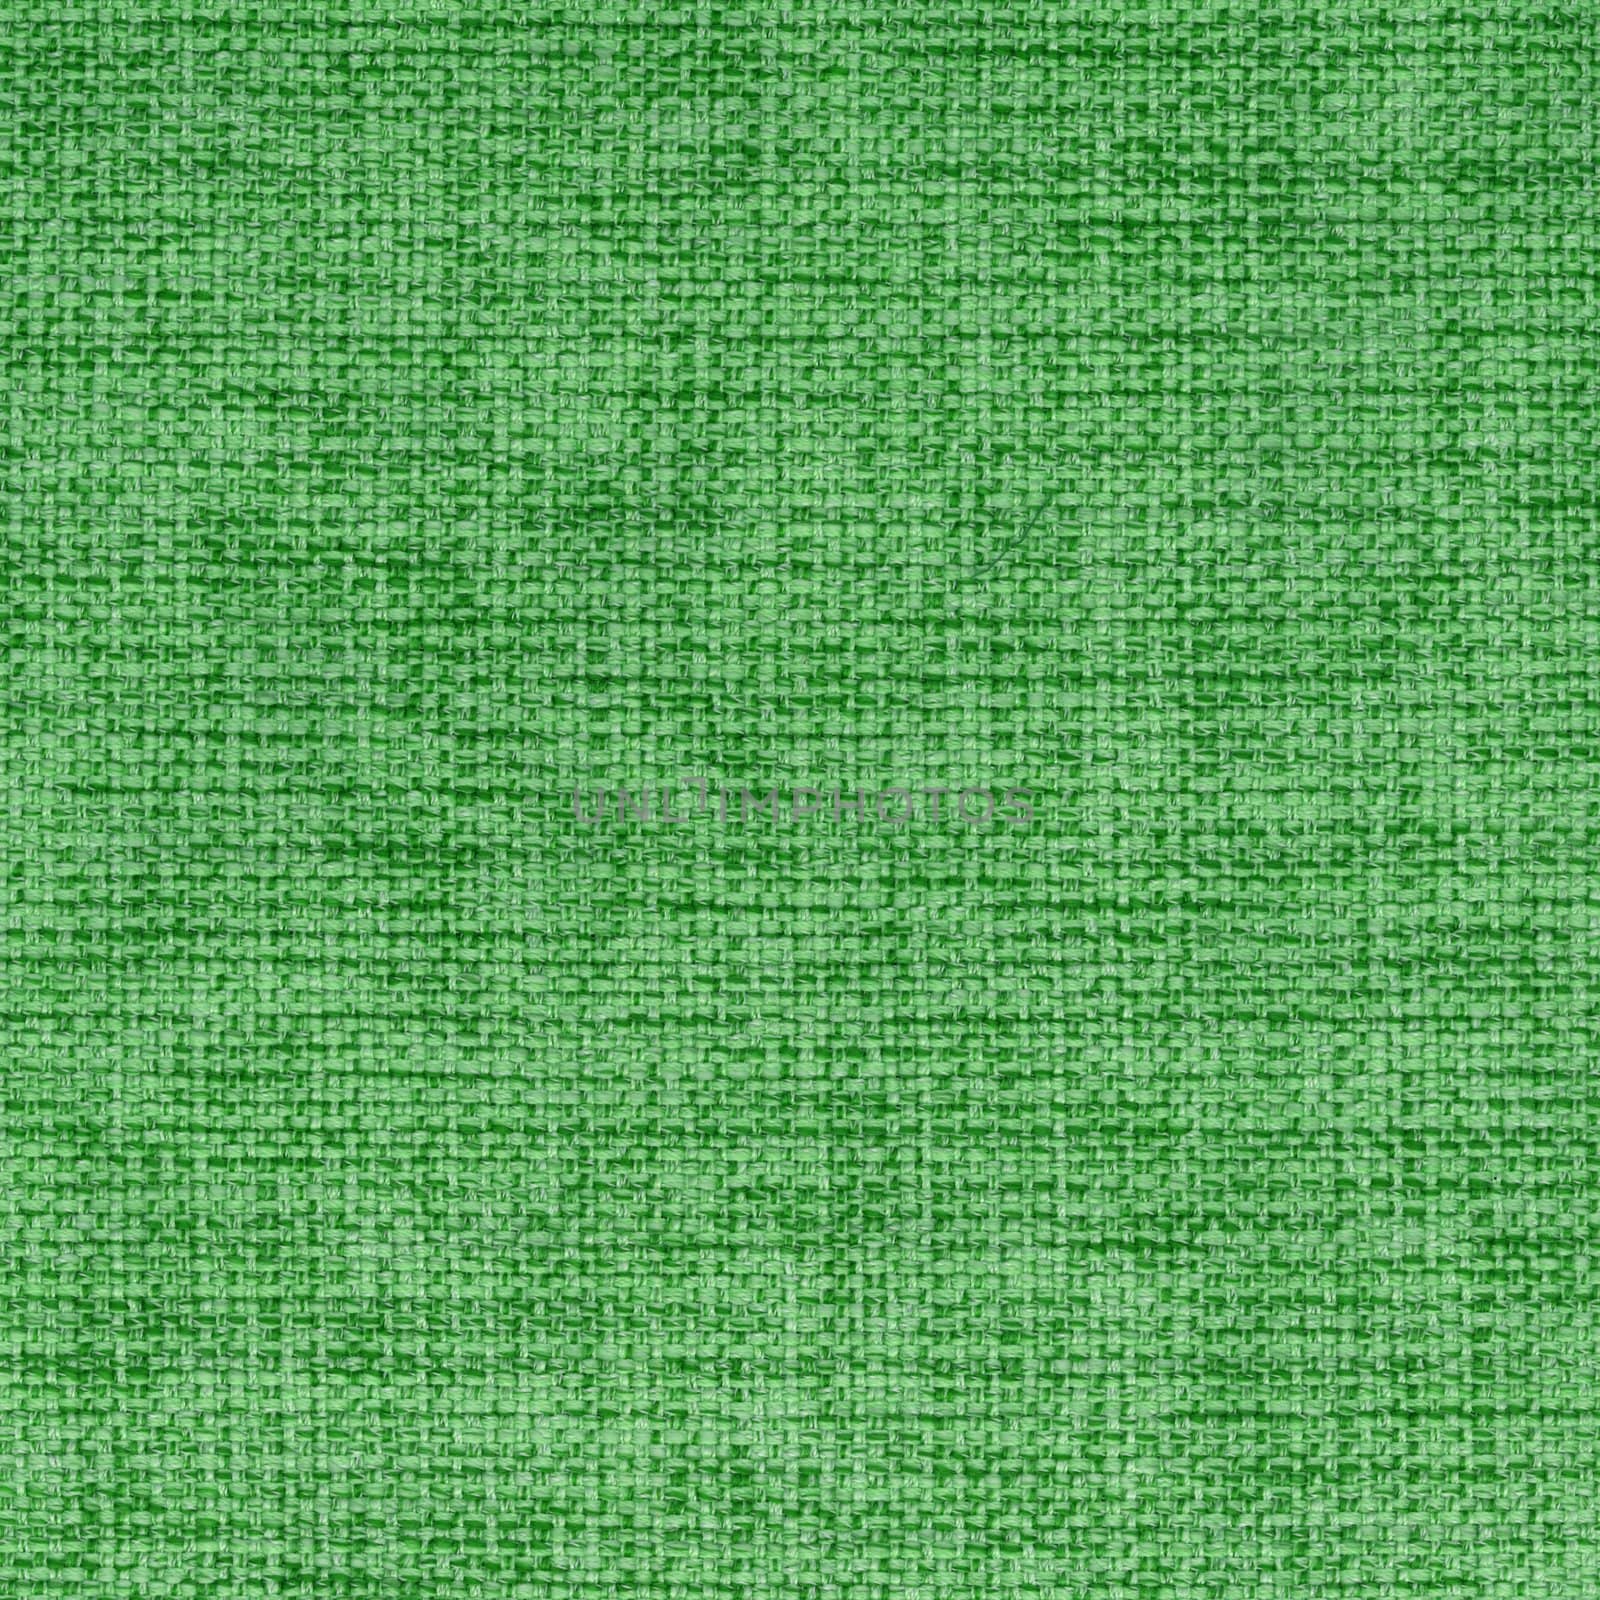 Green Fabric Texture (High.res.scan)